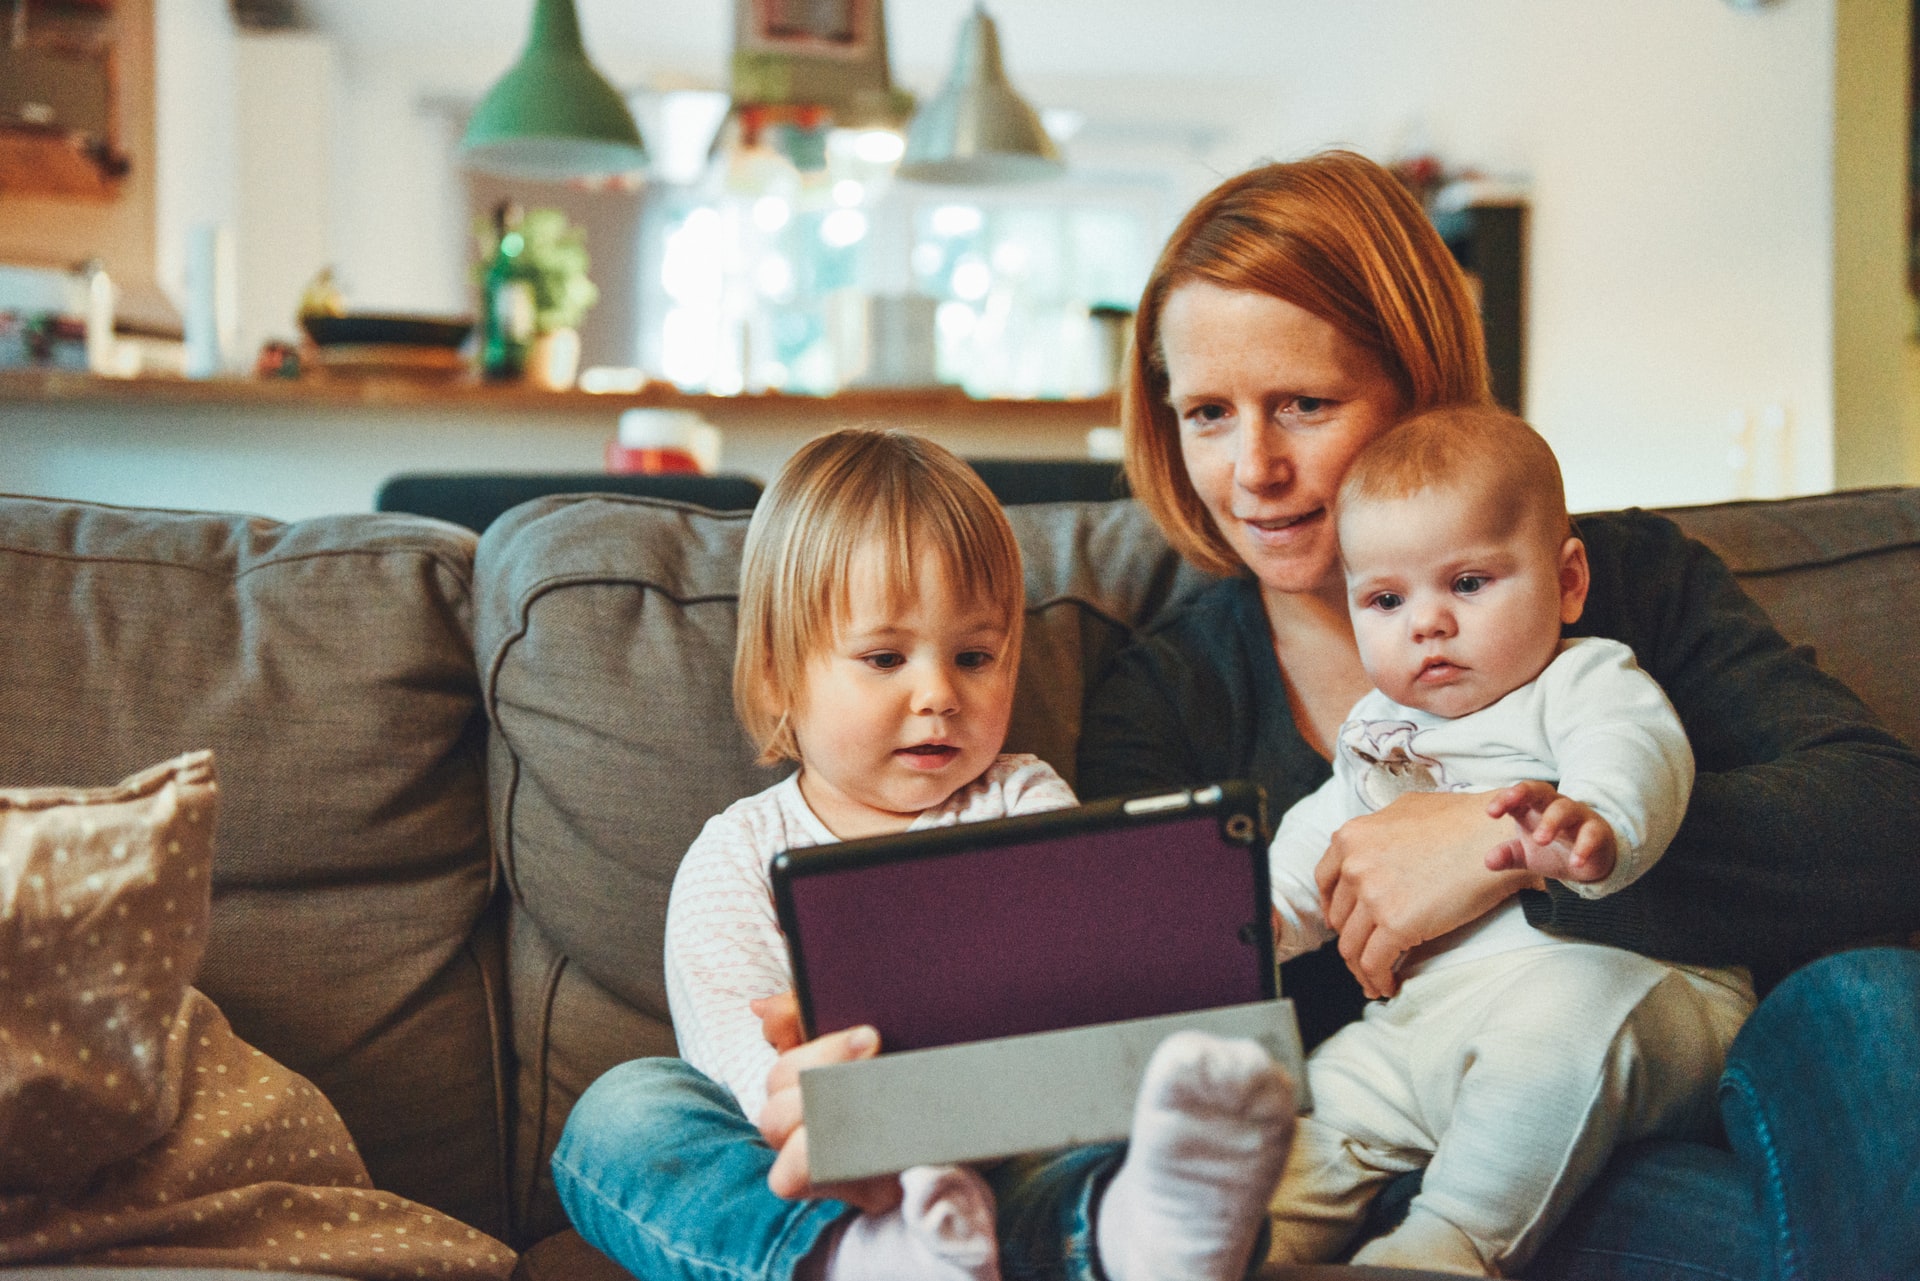 A mother sits on a couch with her two young children, showing a tablet to the older child while holding the younger one. They seem engaged and content in a cozy living room setting during the holidays.